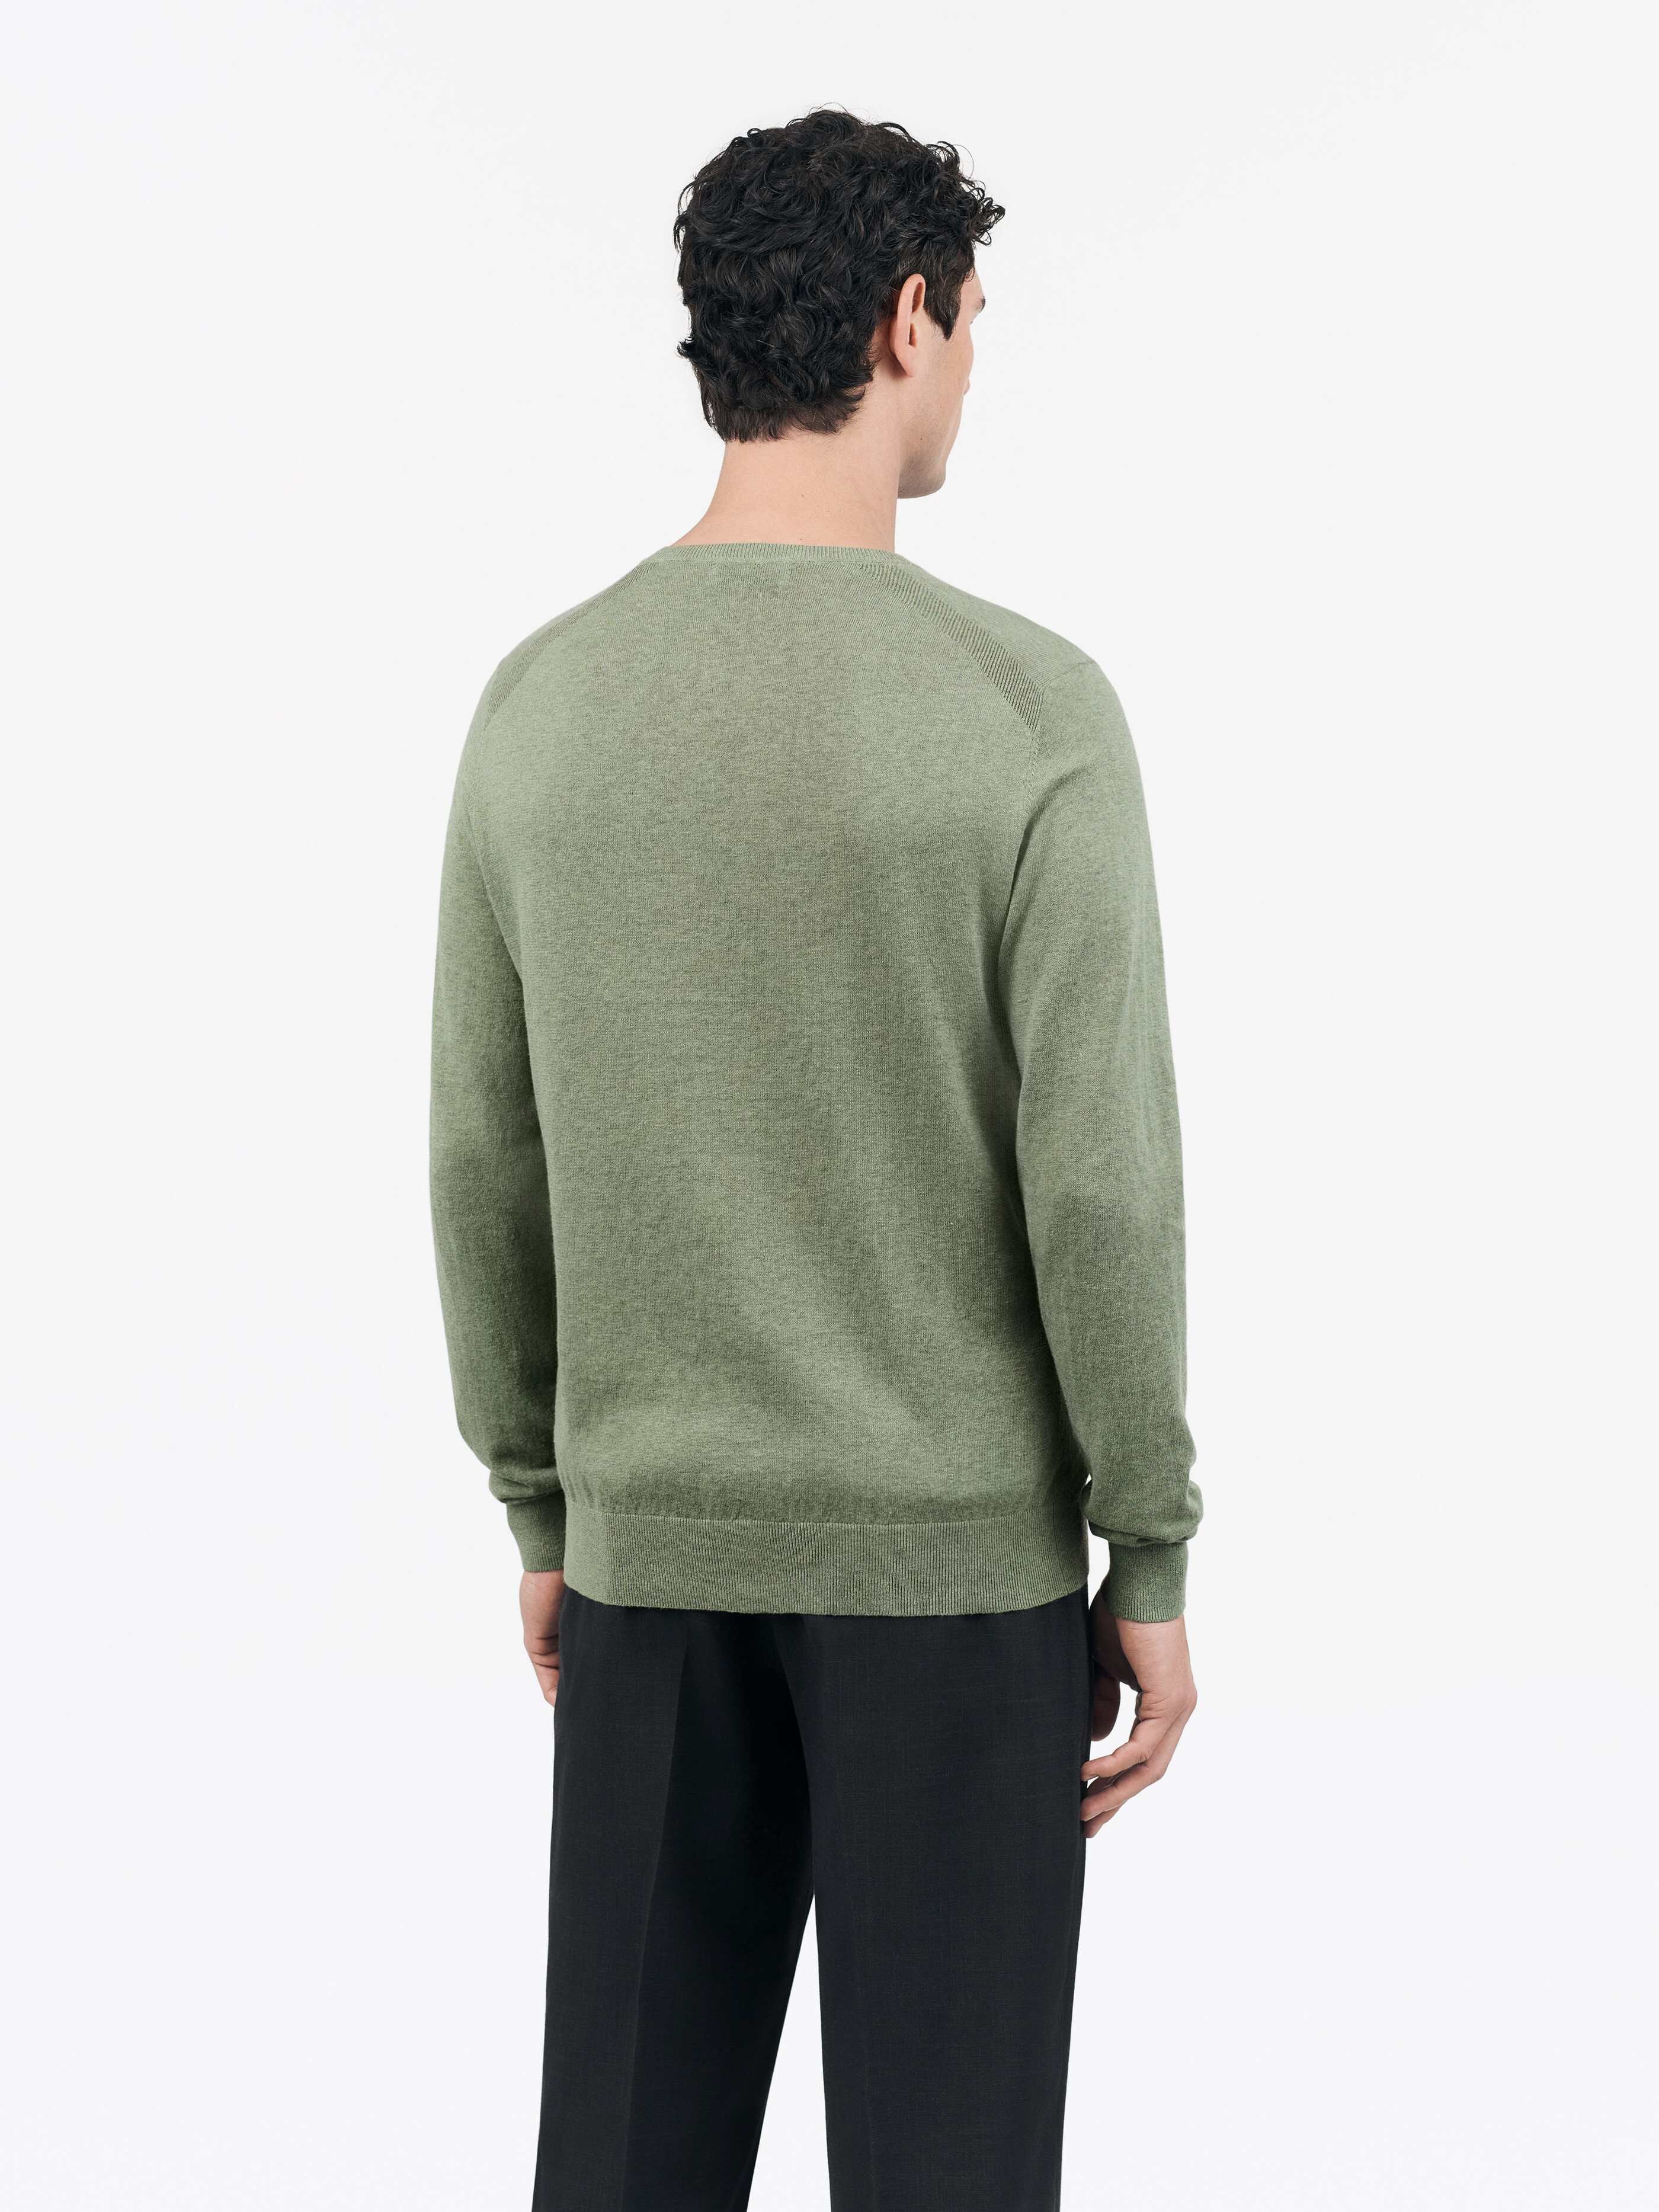 TIGER OF SWEDEN Michas Pullover in Green T72307001  | Shop from eightywingold an official brand partner for Tiger of Sweden Canada and US.